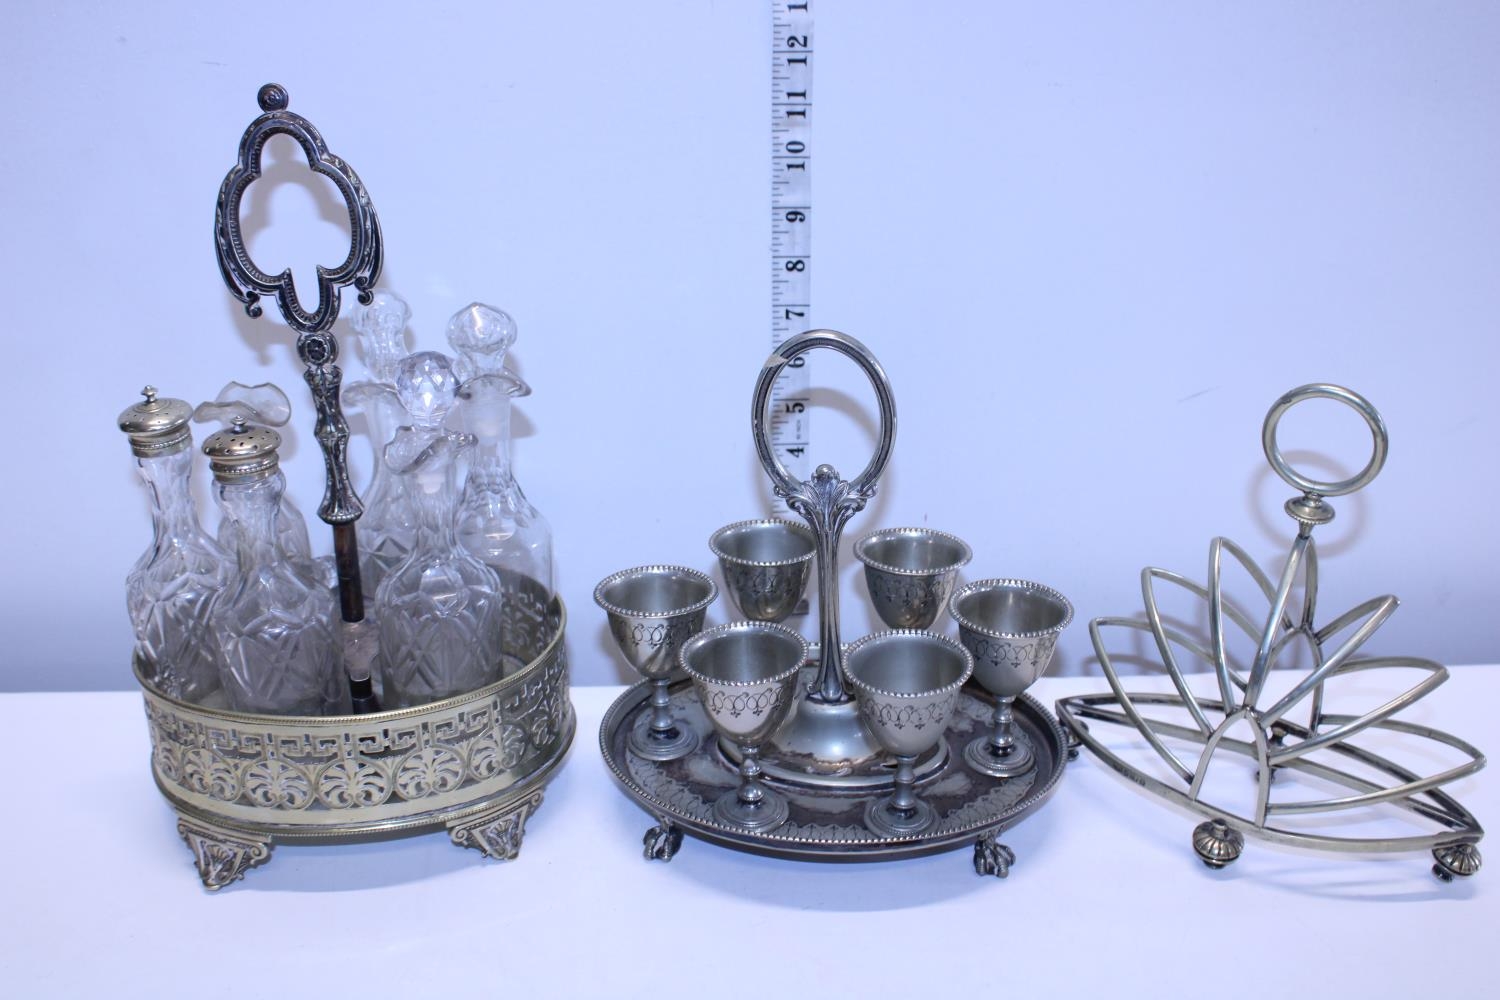 Three pieces of vintage plated ware